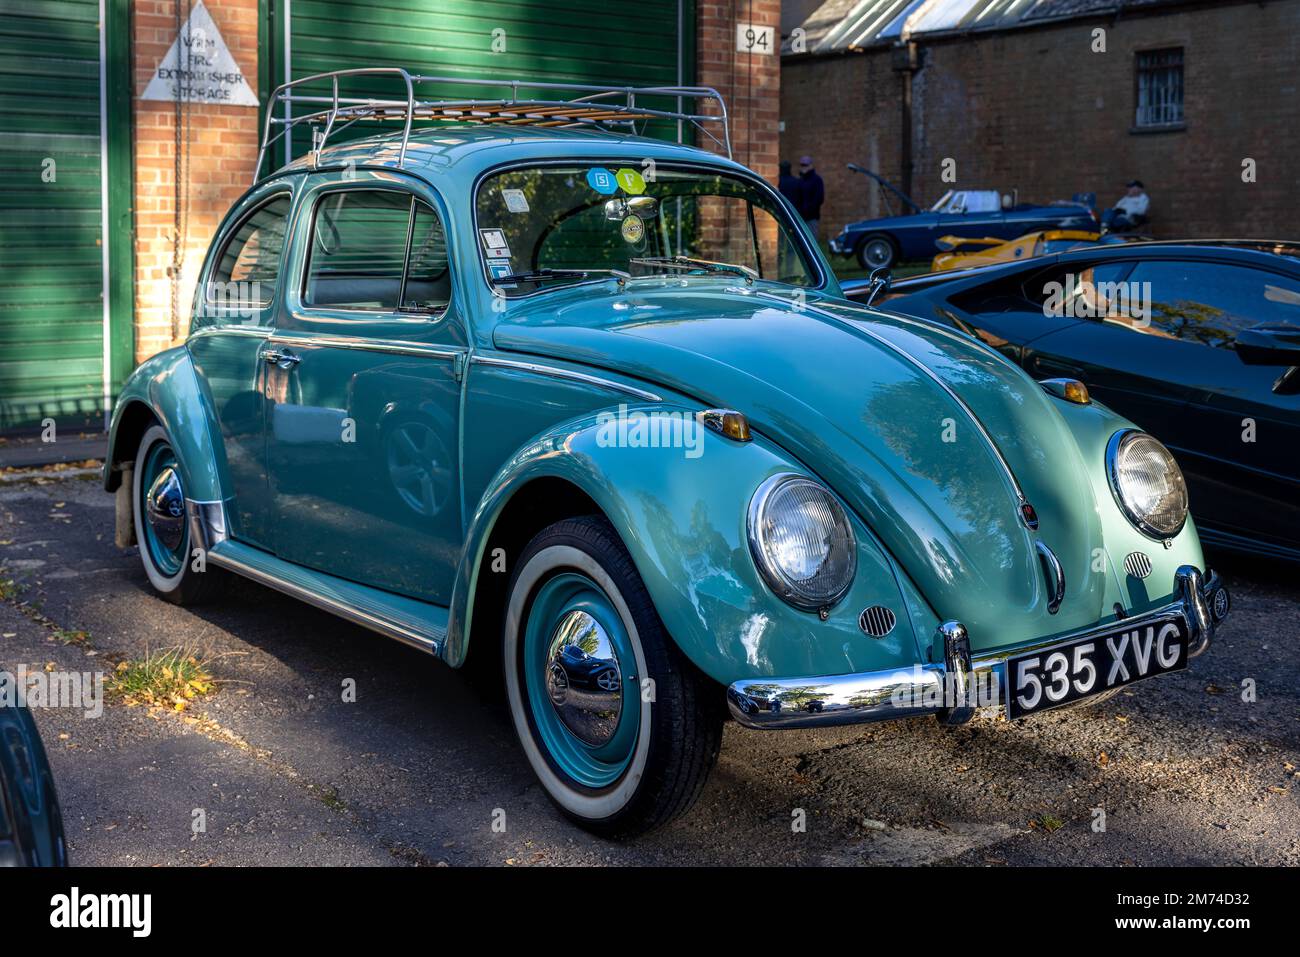 1960 Volkswagen Beetle ‘535 XVG’ on display at the October Scramble held at the Bicester Heritage Centre on the 9th October 2022 Stock Photo